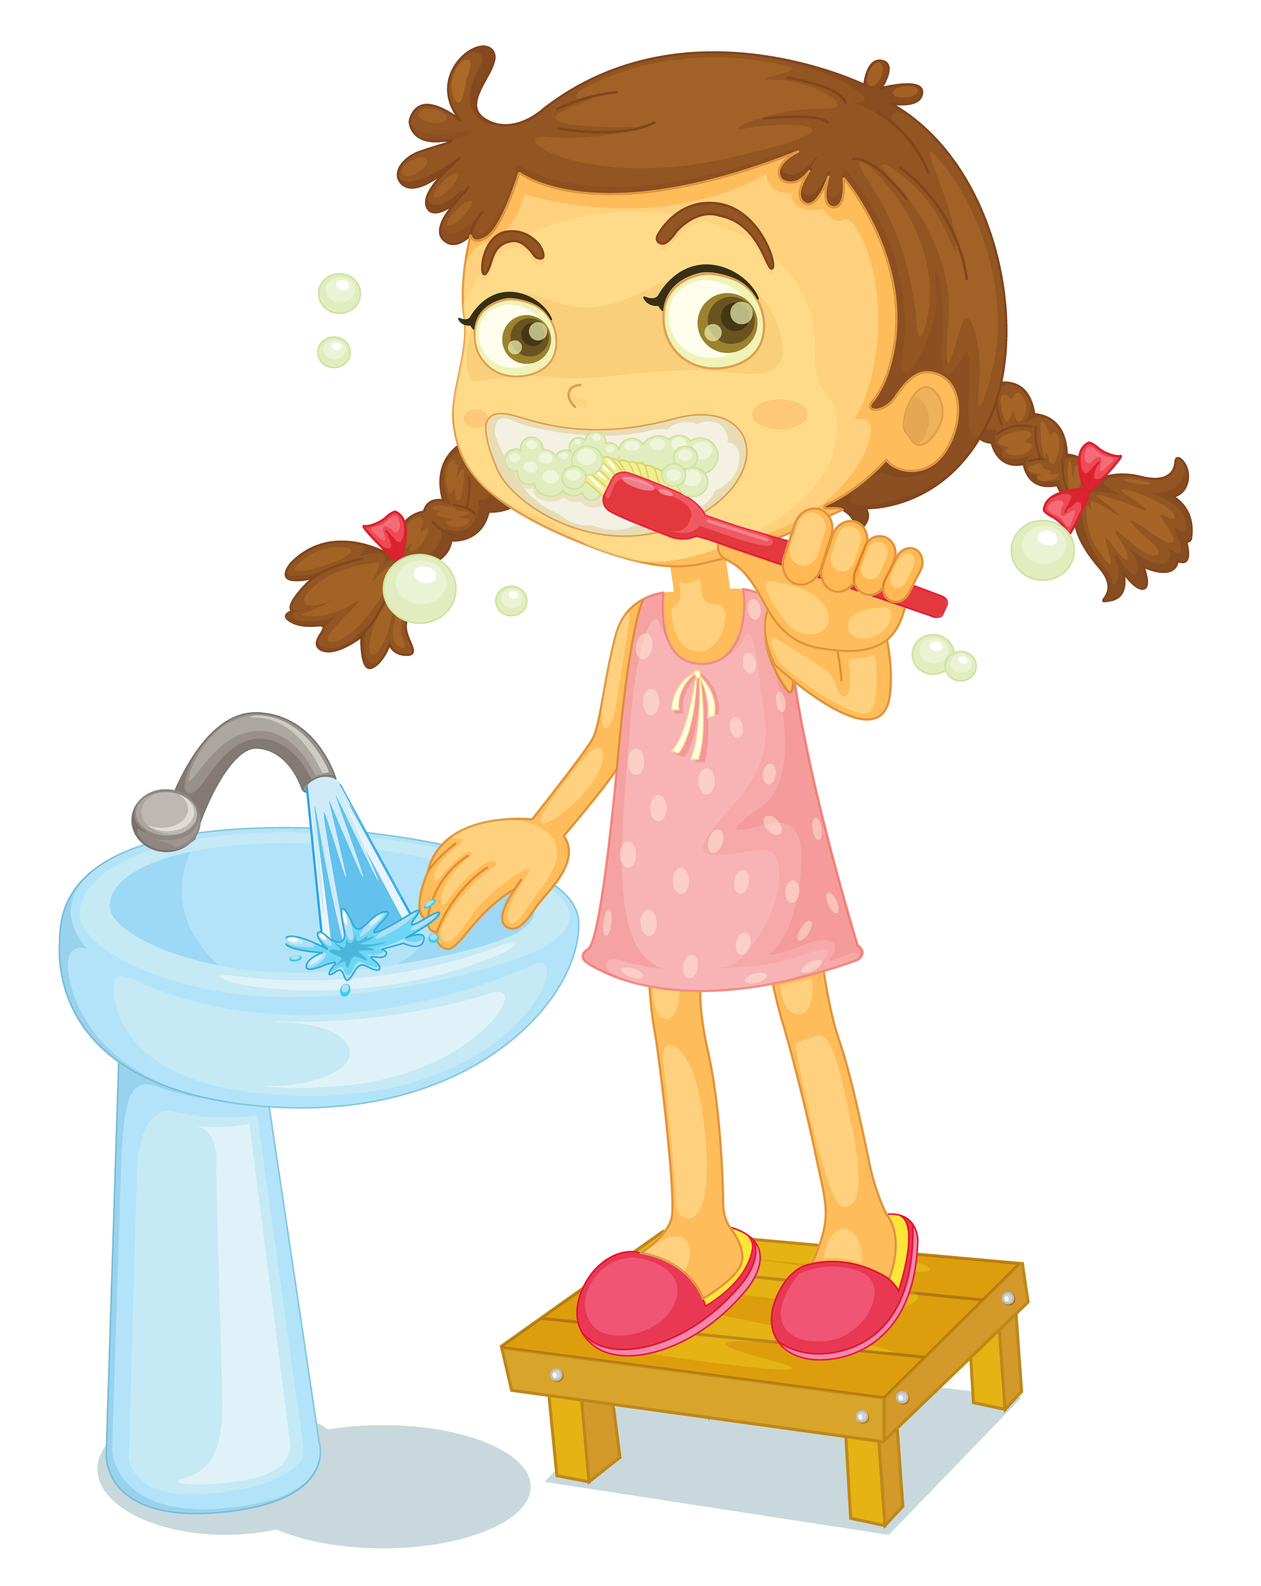 Dental clipart los. Brushing your teeth clip